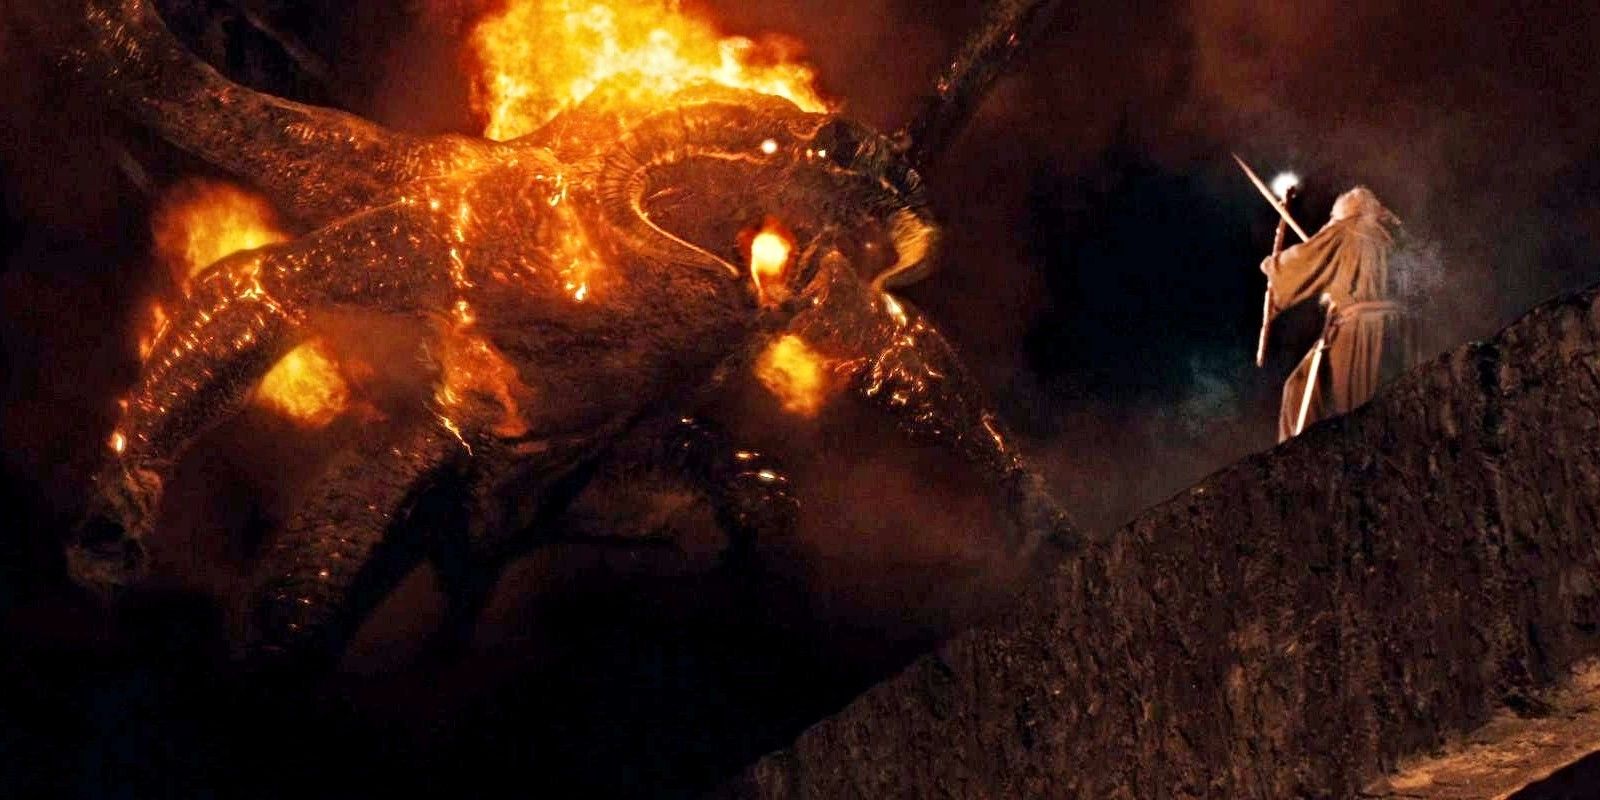 The Lord Of The Rings 10 Iconic Scenes That Need To Be Included In The TV Show